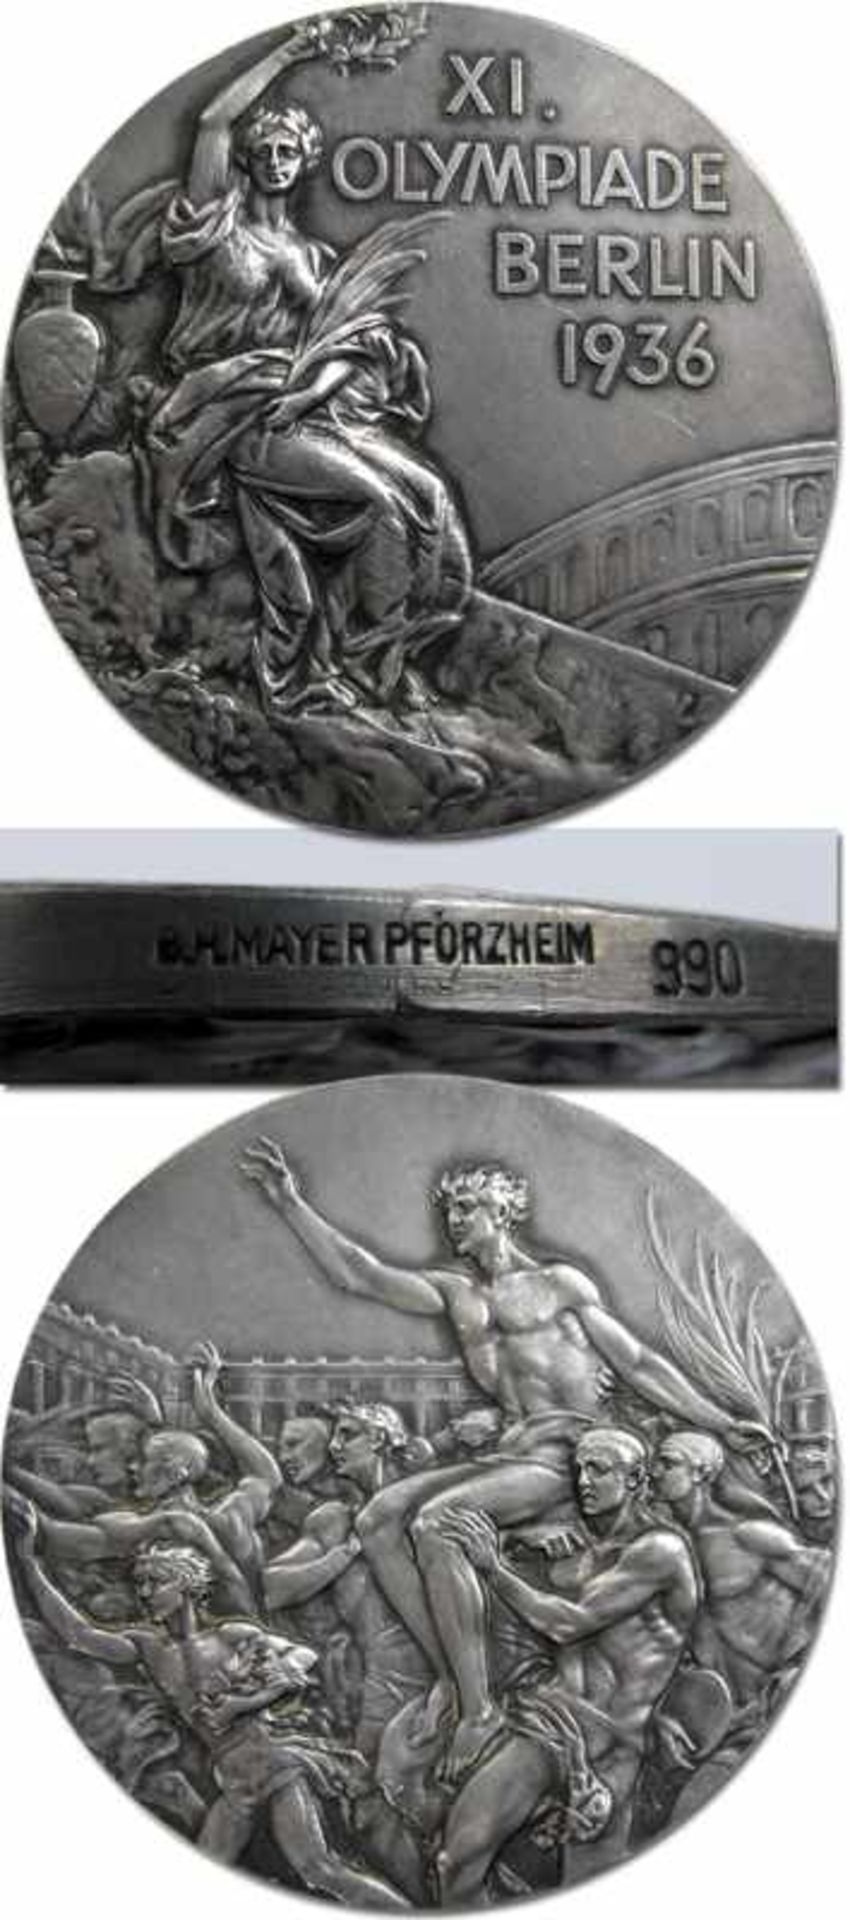 Silver Winner's Medal: Olympic Games Berlin 1936 - For a 2nd place. Stamped on the rim "B.H.Mayer,